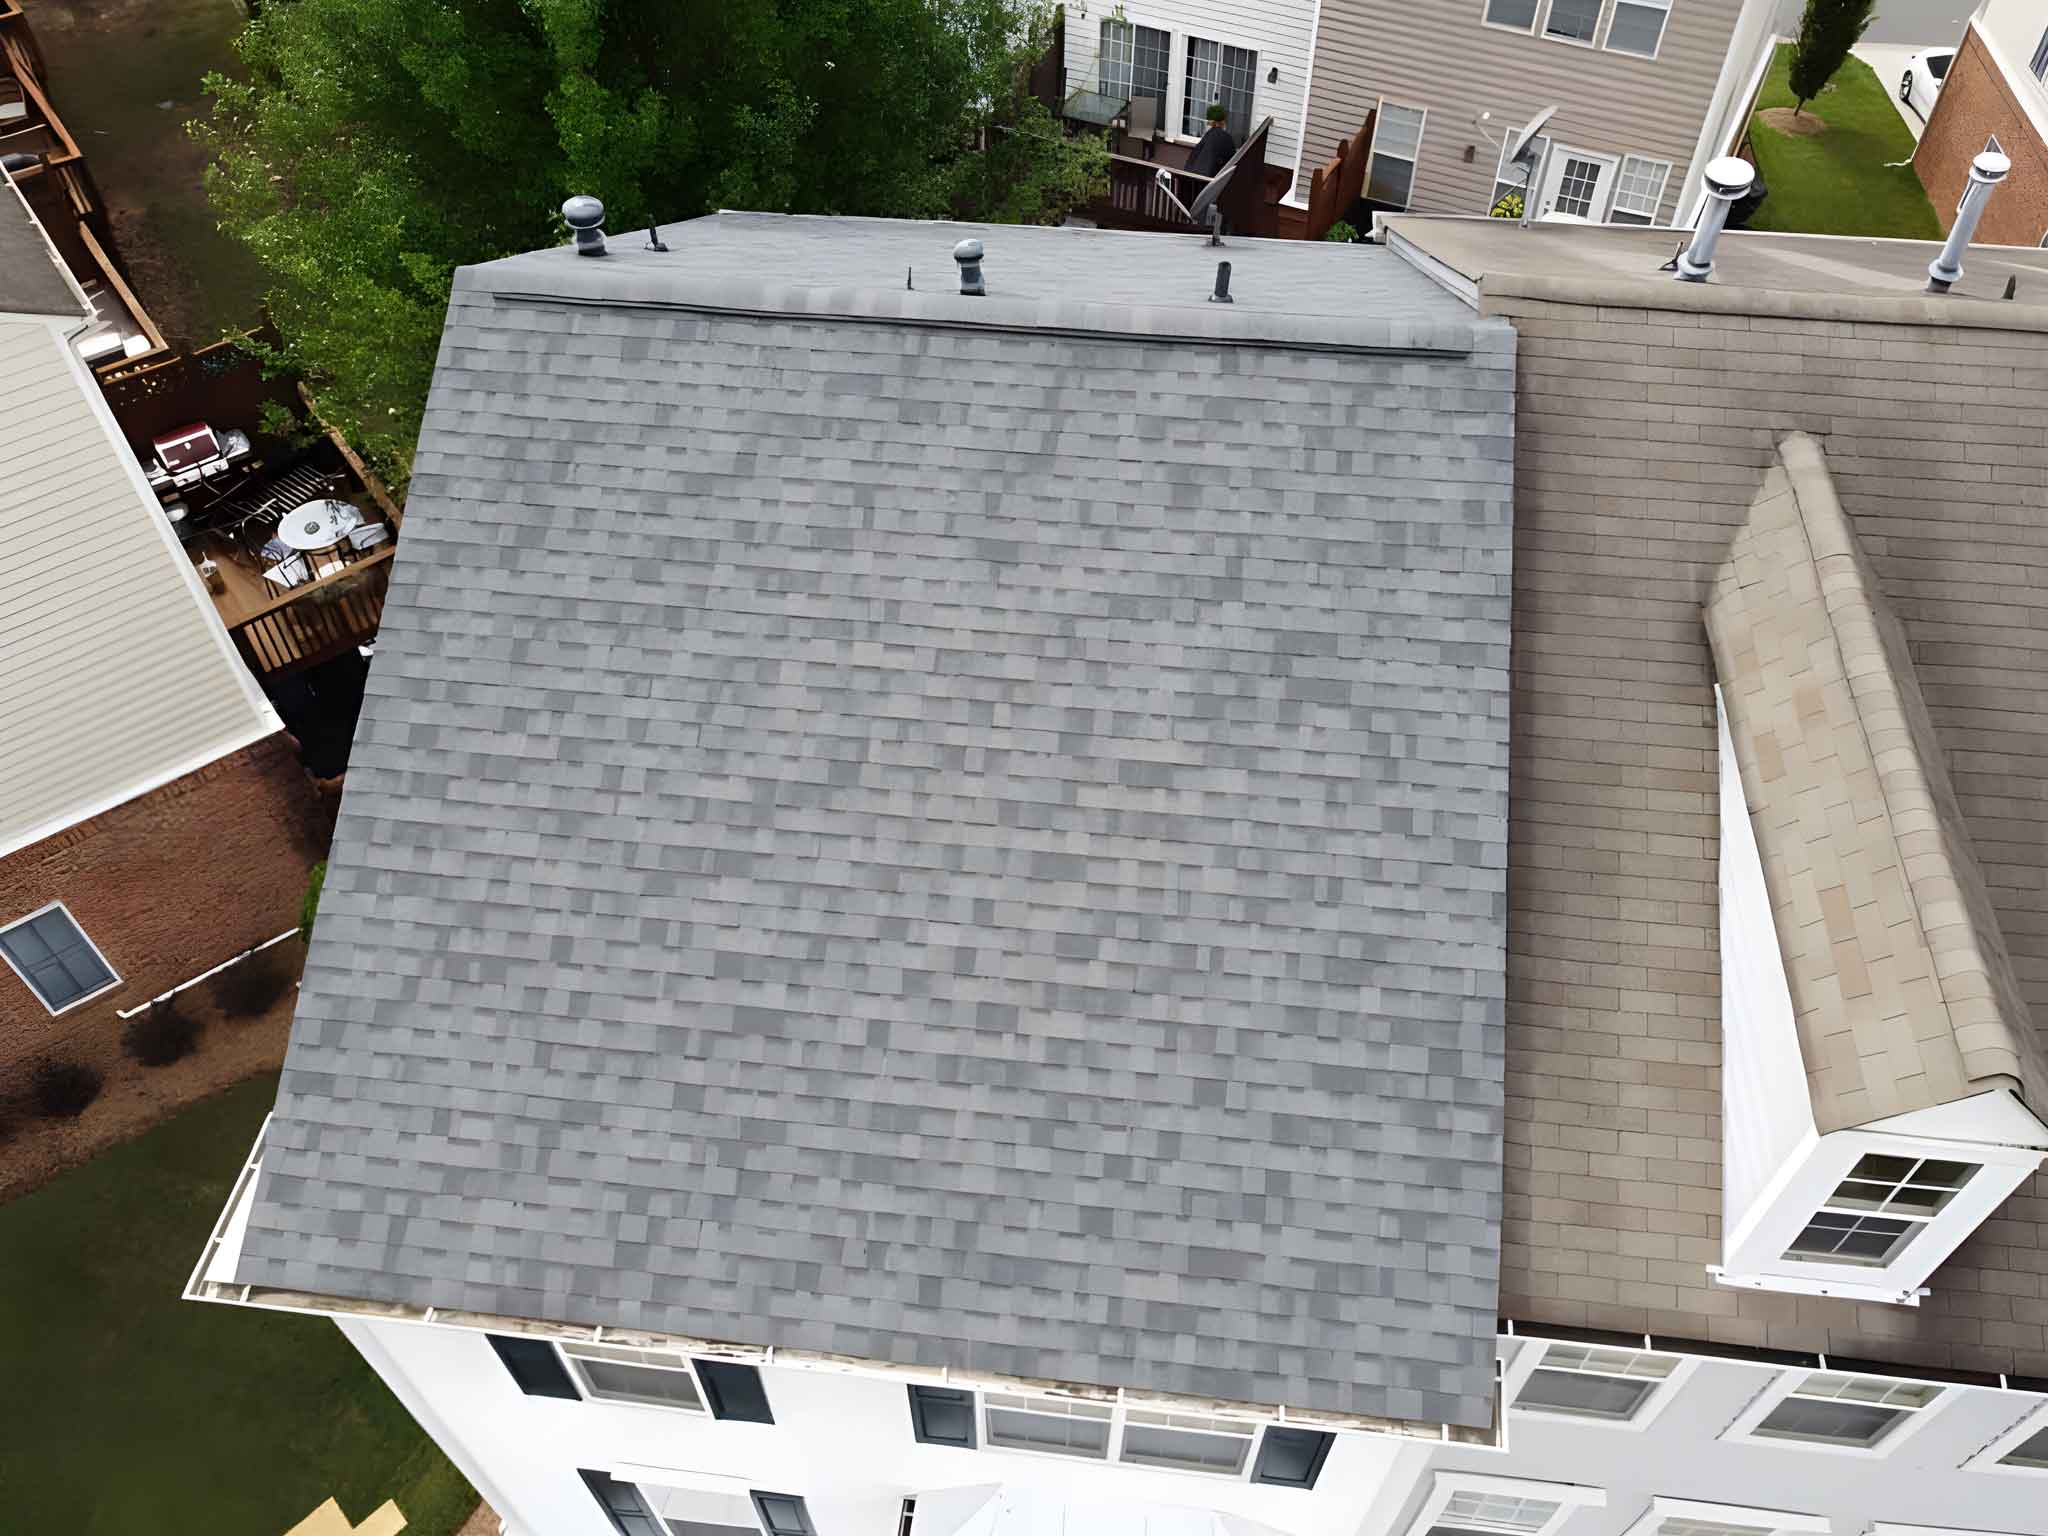 Mechanicsville Reliable roofing experts